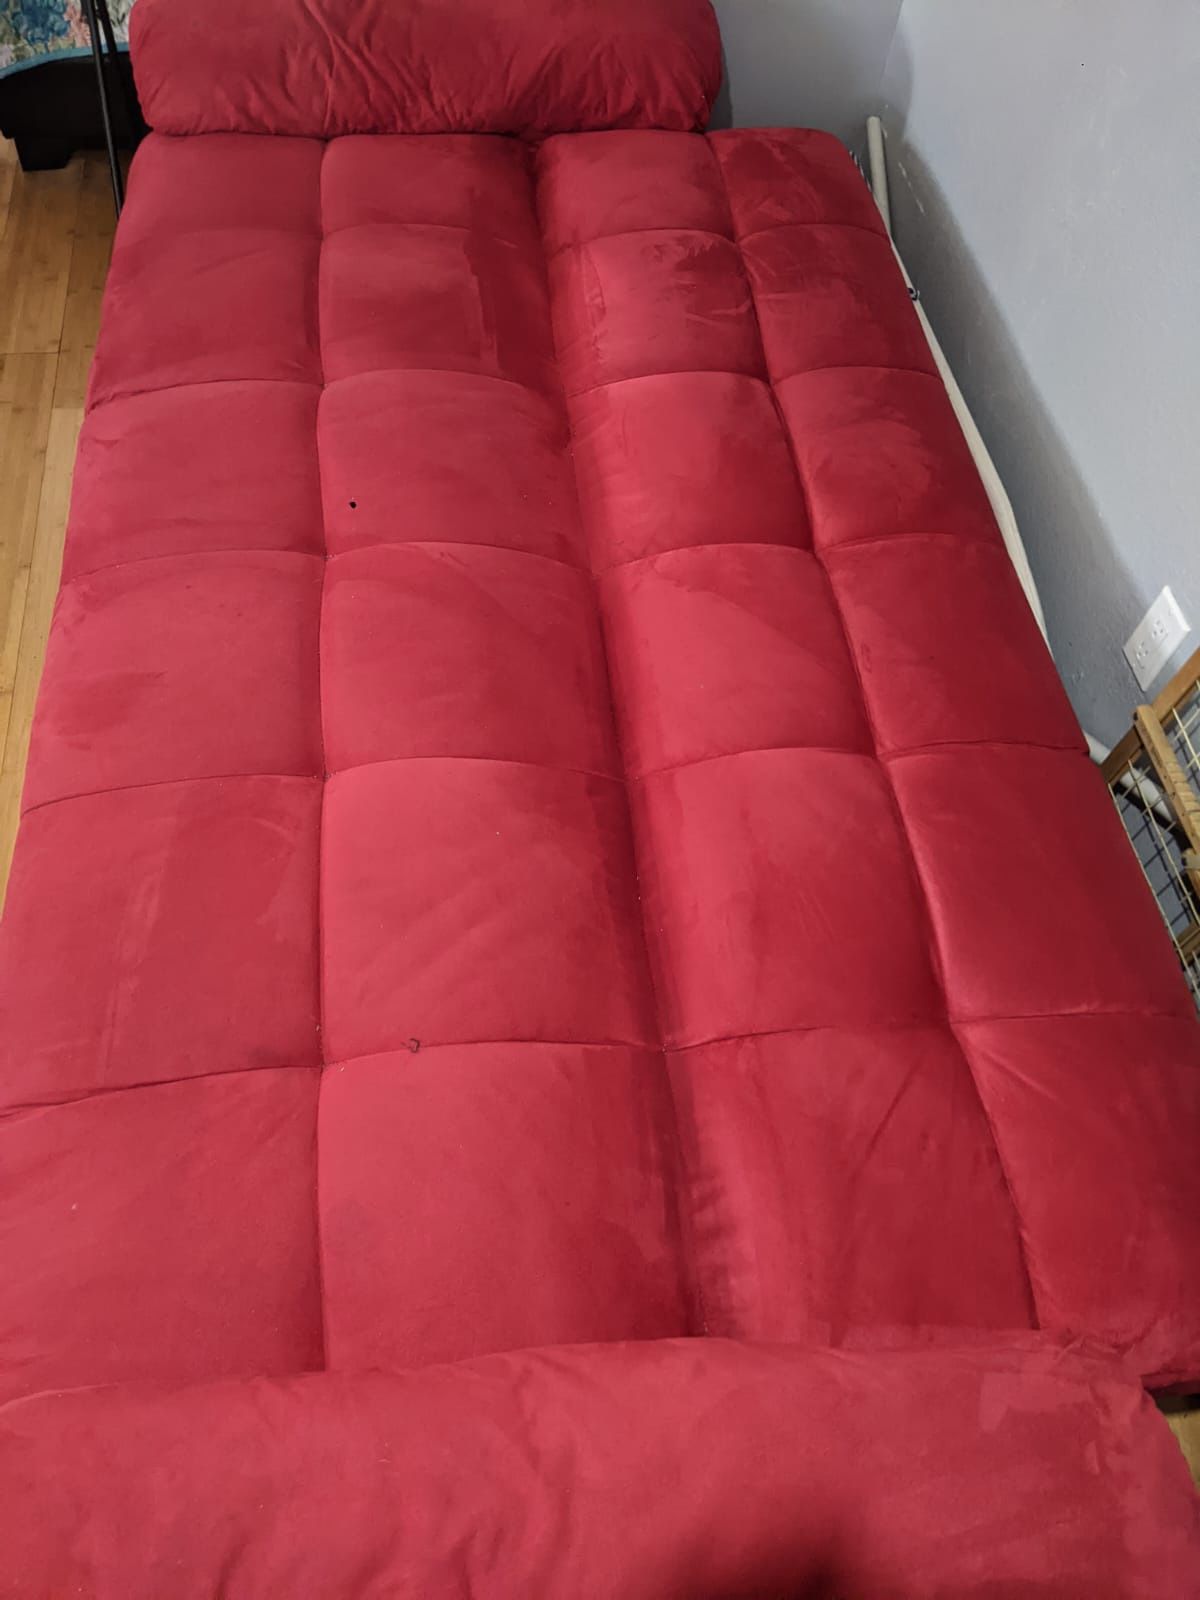 Slightly Used Futon couch